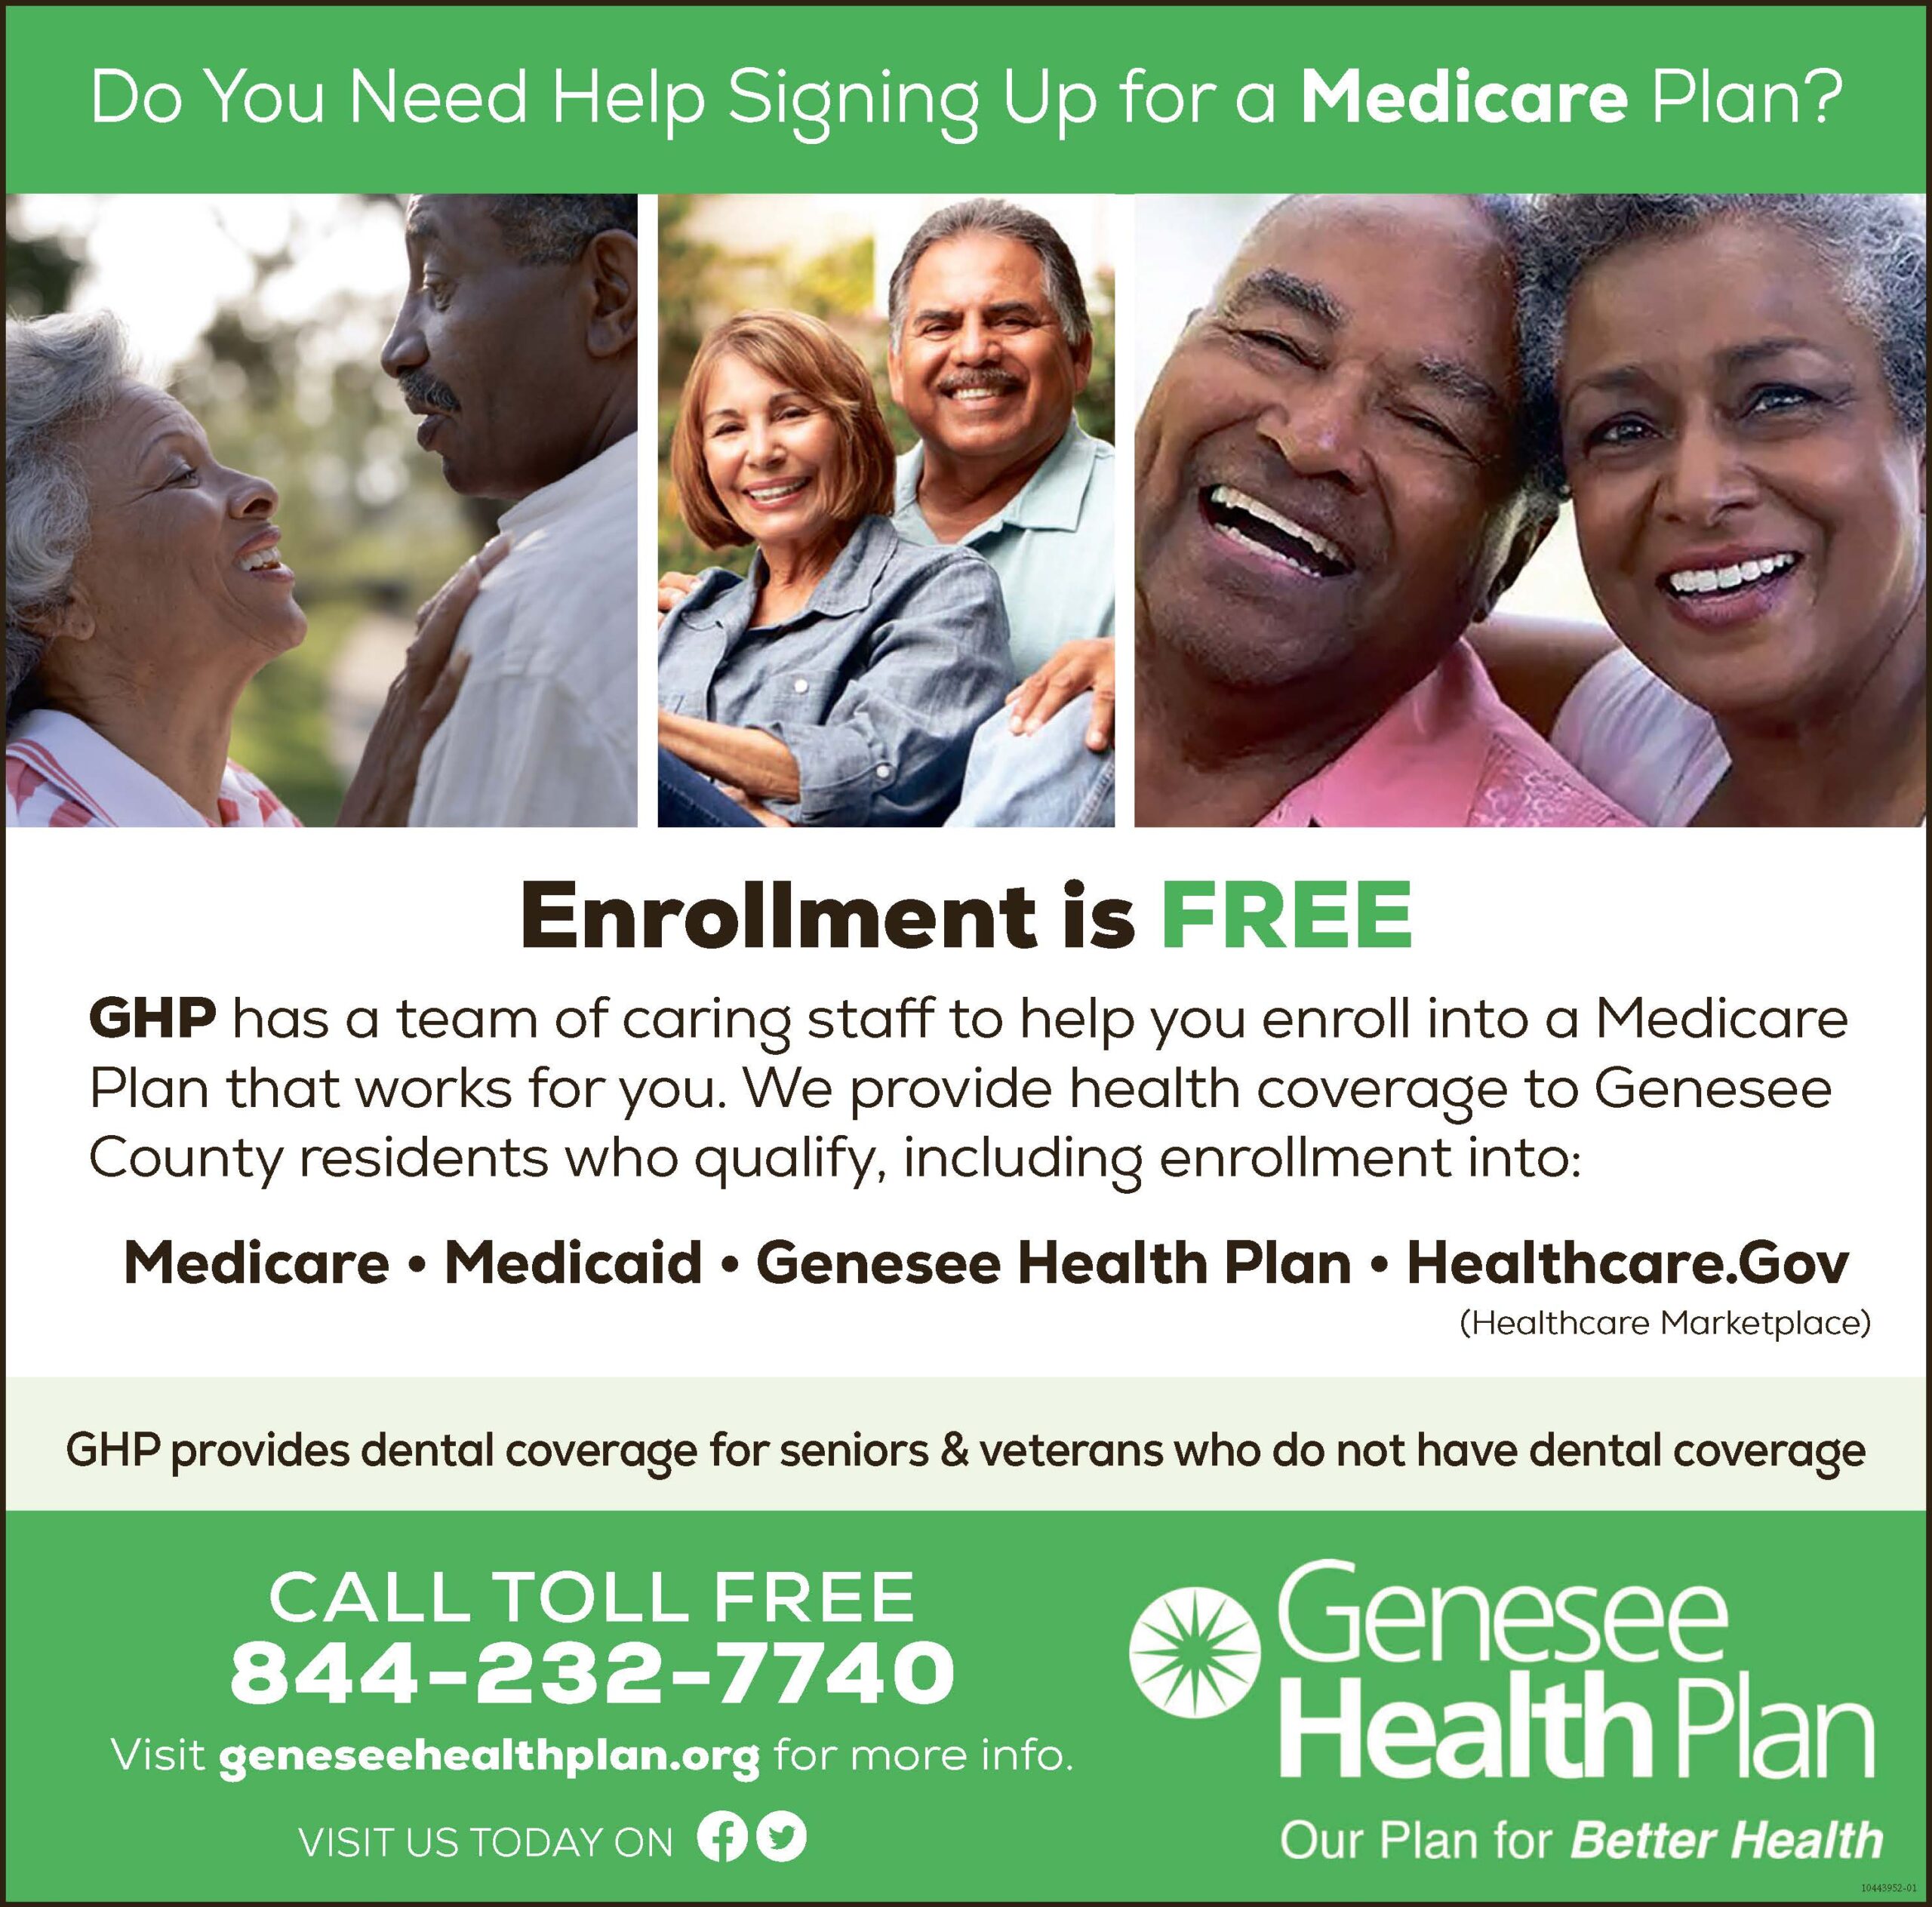 Ghp centers for medicare and medicaid services alcon tears naturale free singapore classified